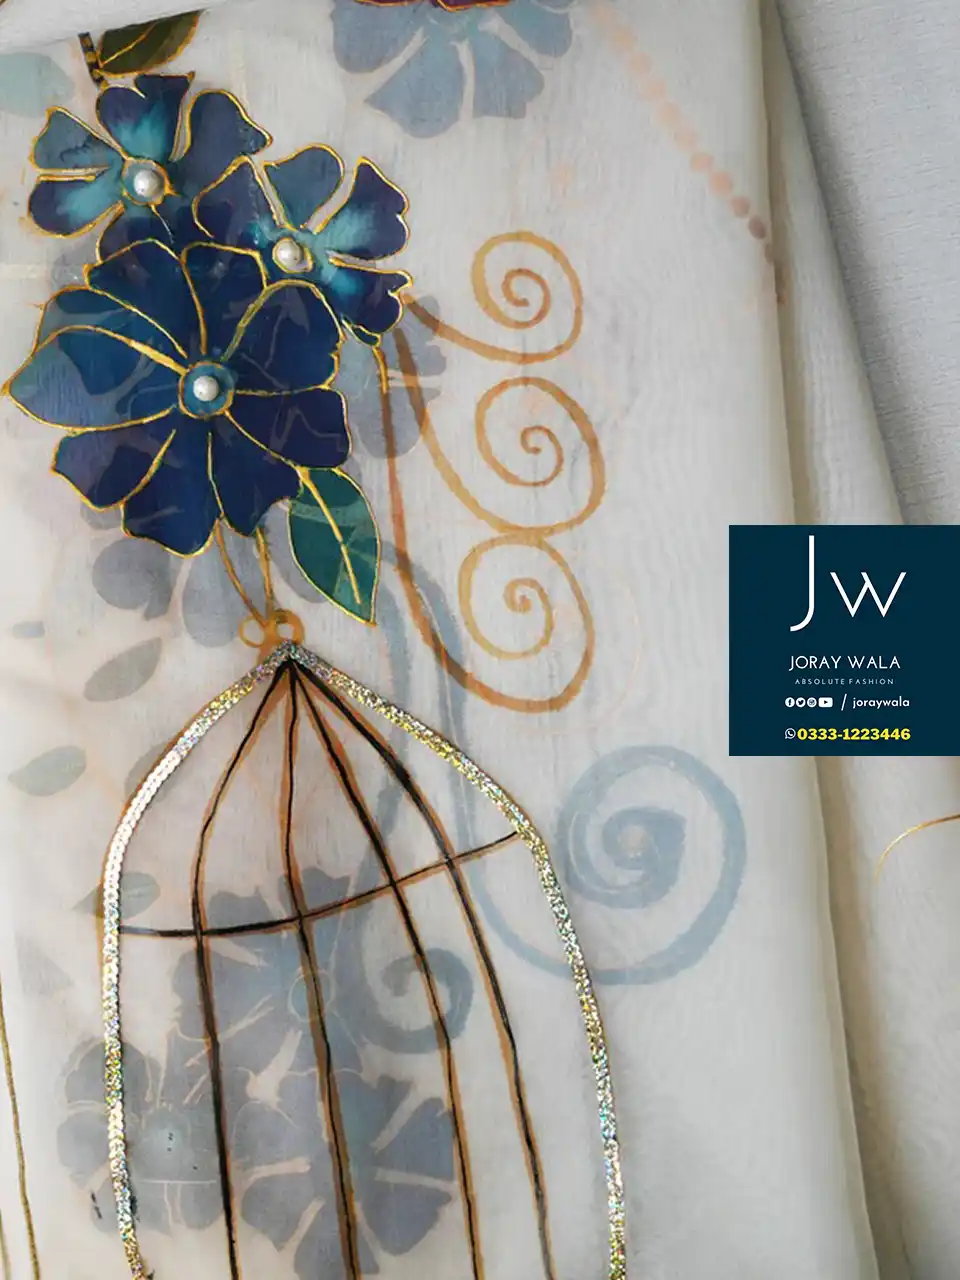 Partywear Fancy Dupatta | Golden Cage Dupatta, this is beautiful hand painted dupatta available at joraywala